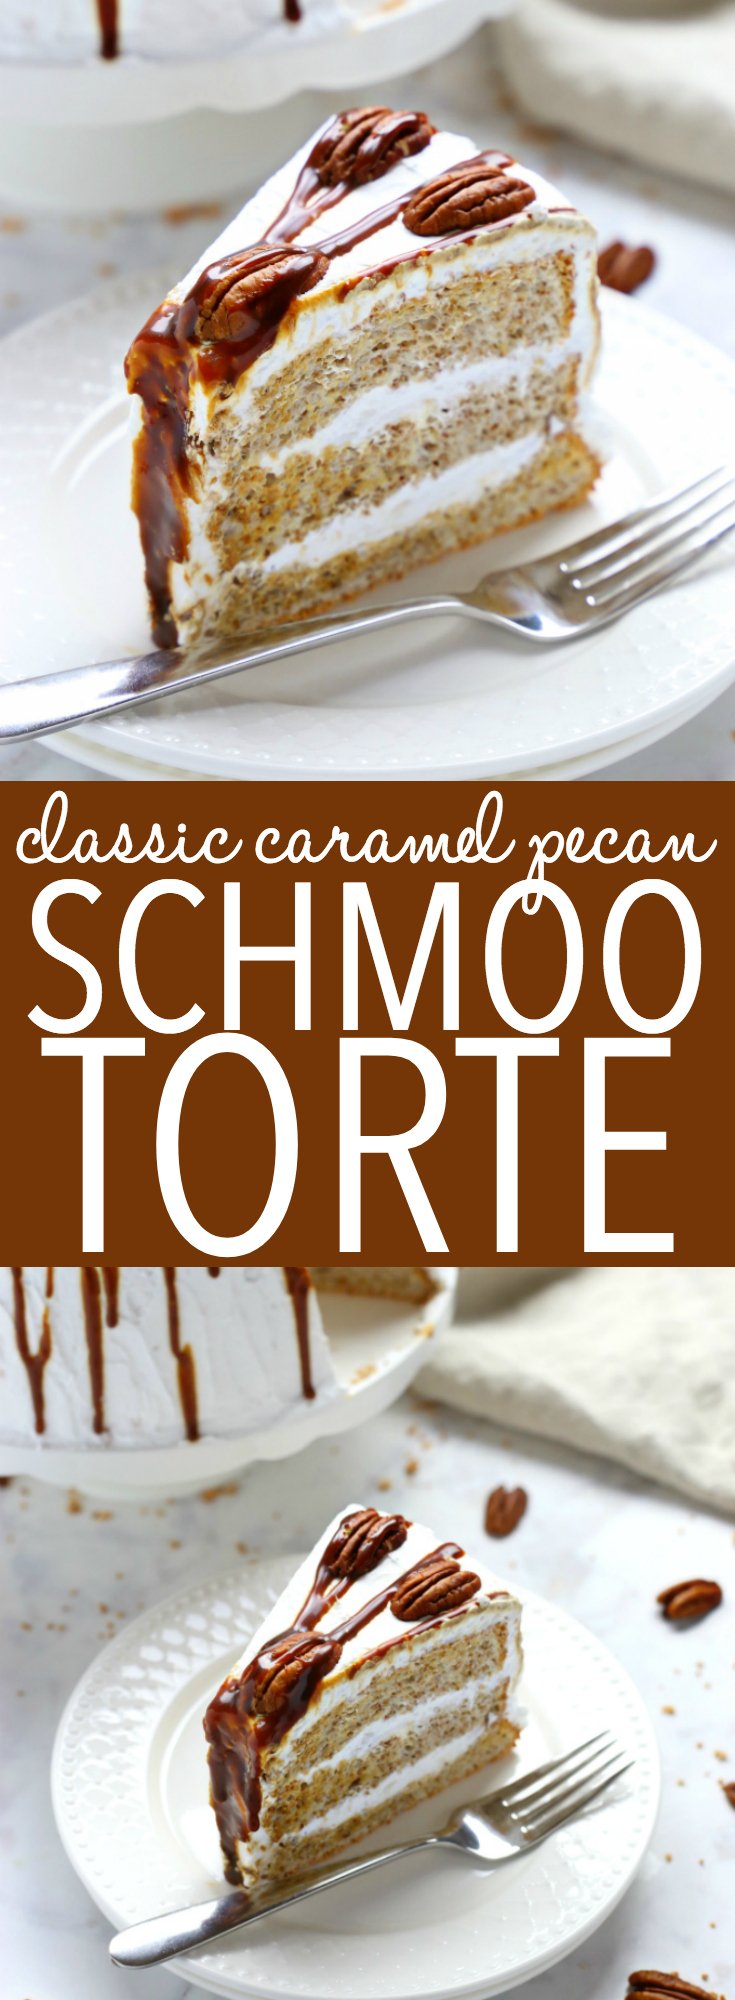 This Classic Caramel Pecan Schmoo Torte is a delicious and classically Canadian layer cake with a pecan-flavoured Angel Food Cake base, fluffy whipped cream frosting, and homemade caramel sauce! It's sweet and decadent and makes the perfect impressive dessert! Recipe from thebusybaker.ca! #schmootorte #canadiancake #caramelpecancake via @busybakerblog